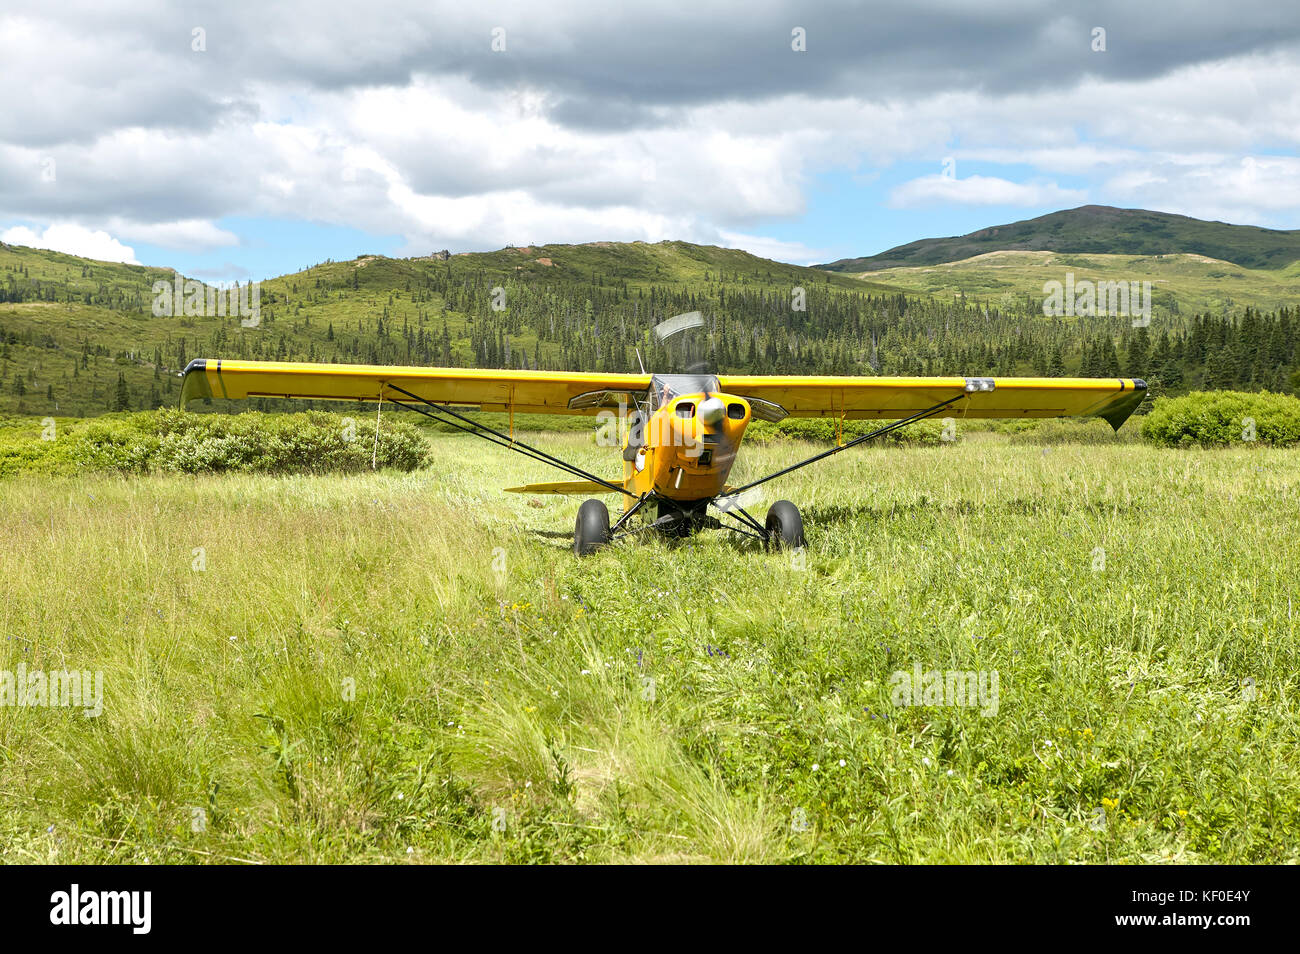 A small, yellow aircraft taking off on a grass, country meadow runway in a scenic location. Stock Photo